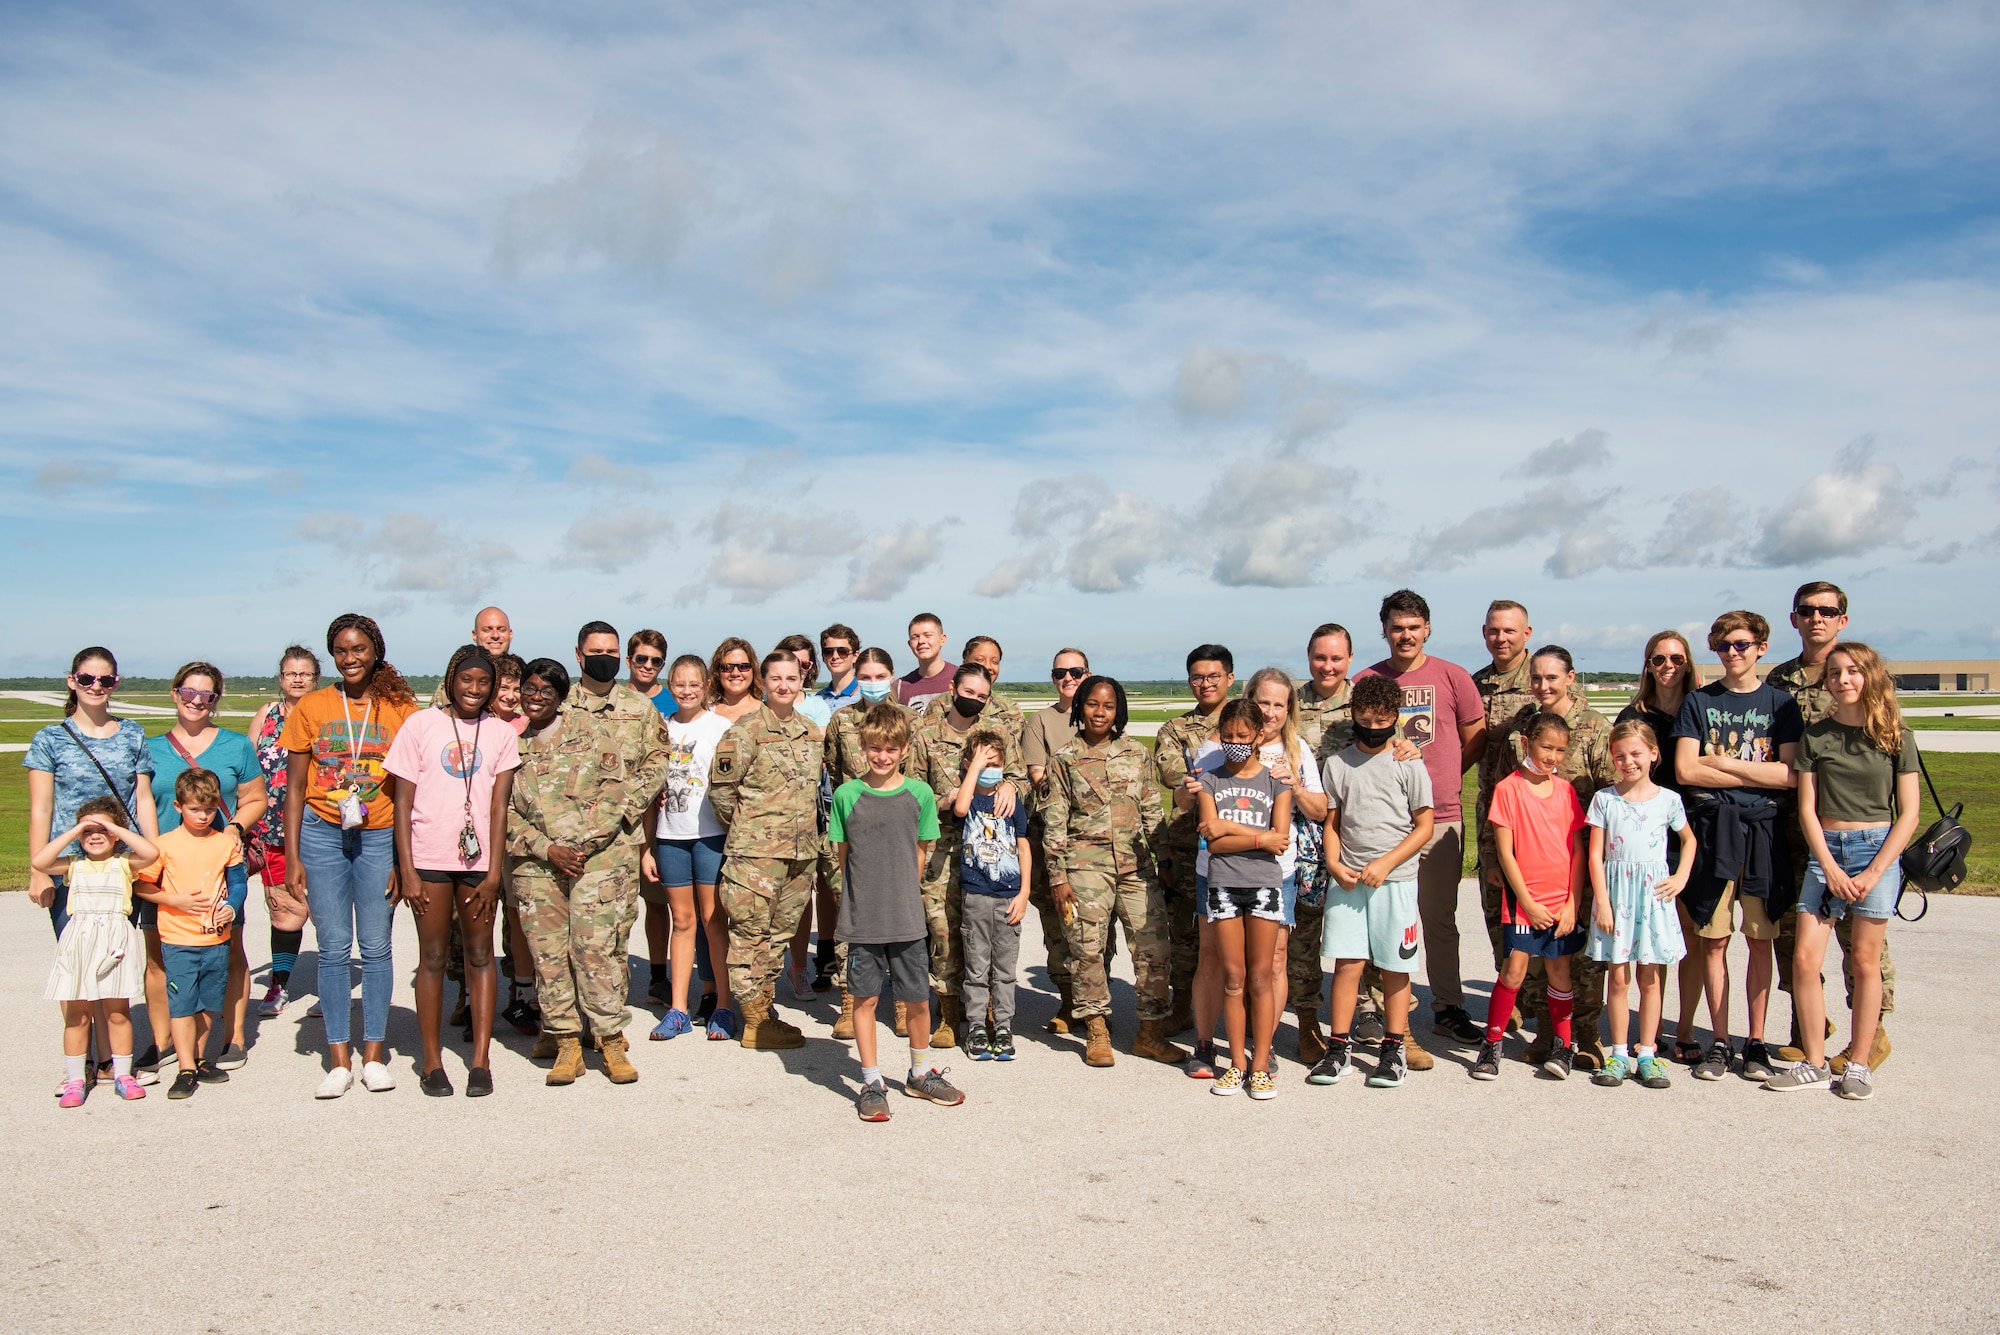 Airmen from the 36th Medical Group come together for a group photo with their families during a flight line engagement for Pacific Iron 2021 at Andersen Air Force Base, Guam, Aug. 4, 2021. The flight line viewing was an opportunity for members assigned to Andersen AFB to see aircraft takeoff up-close and to discuss general aircraft roles, while showcasing the immense effort that it takes to generate airpower. (U.S. Air Force photo by Senior Airman Aubree Owens)